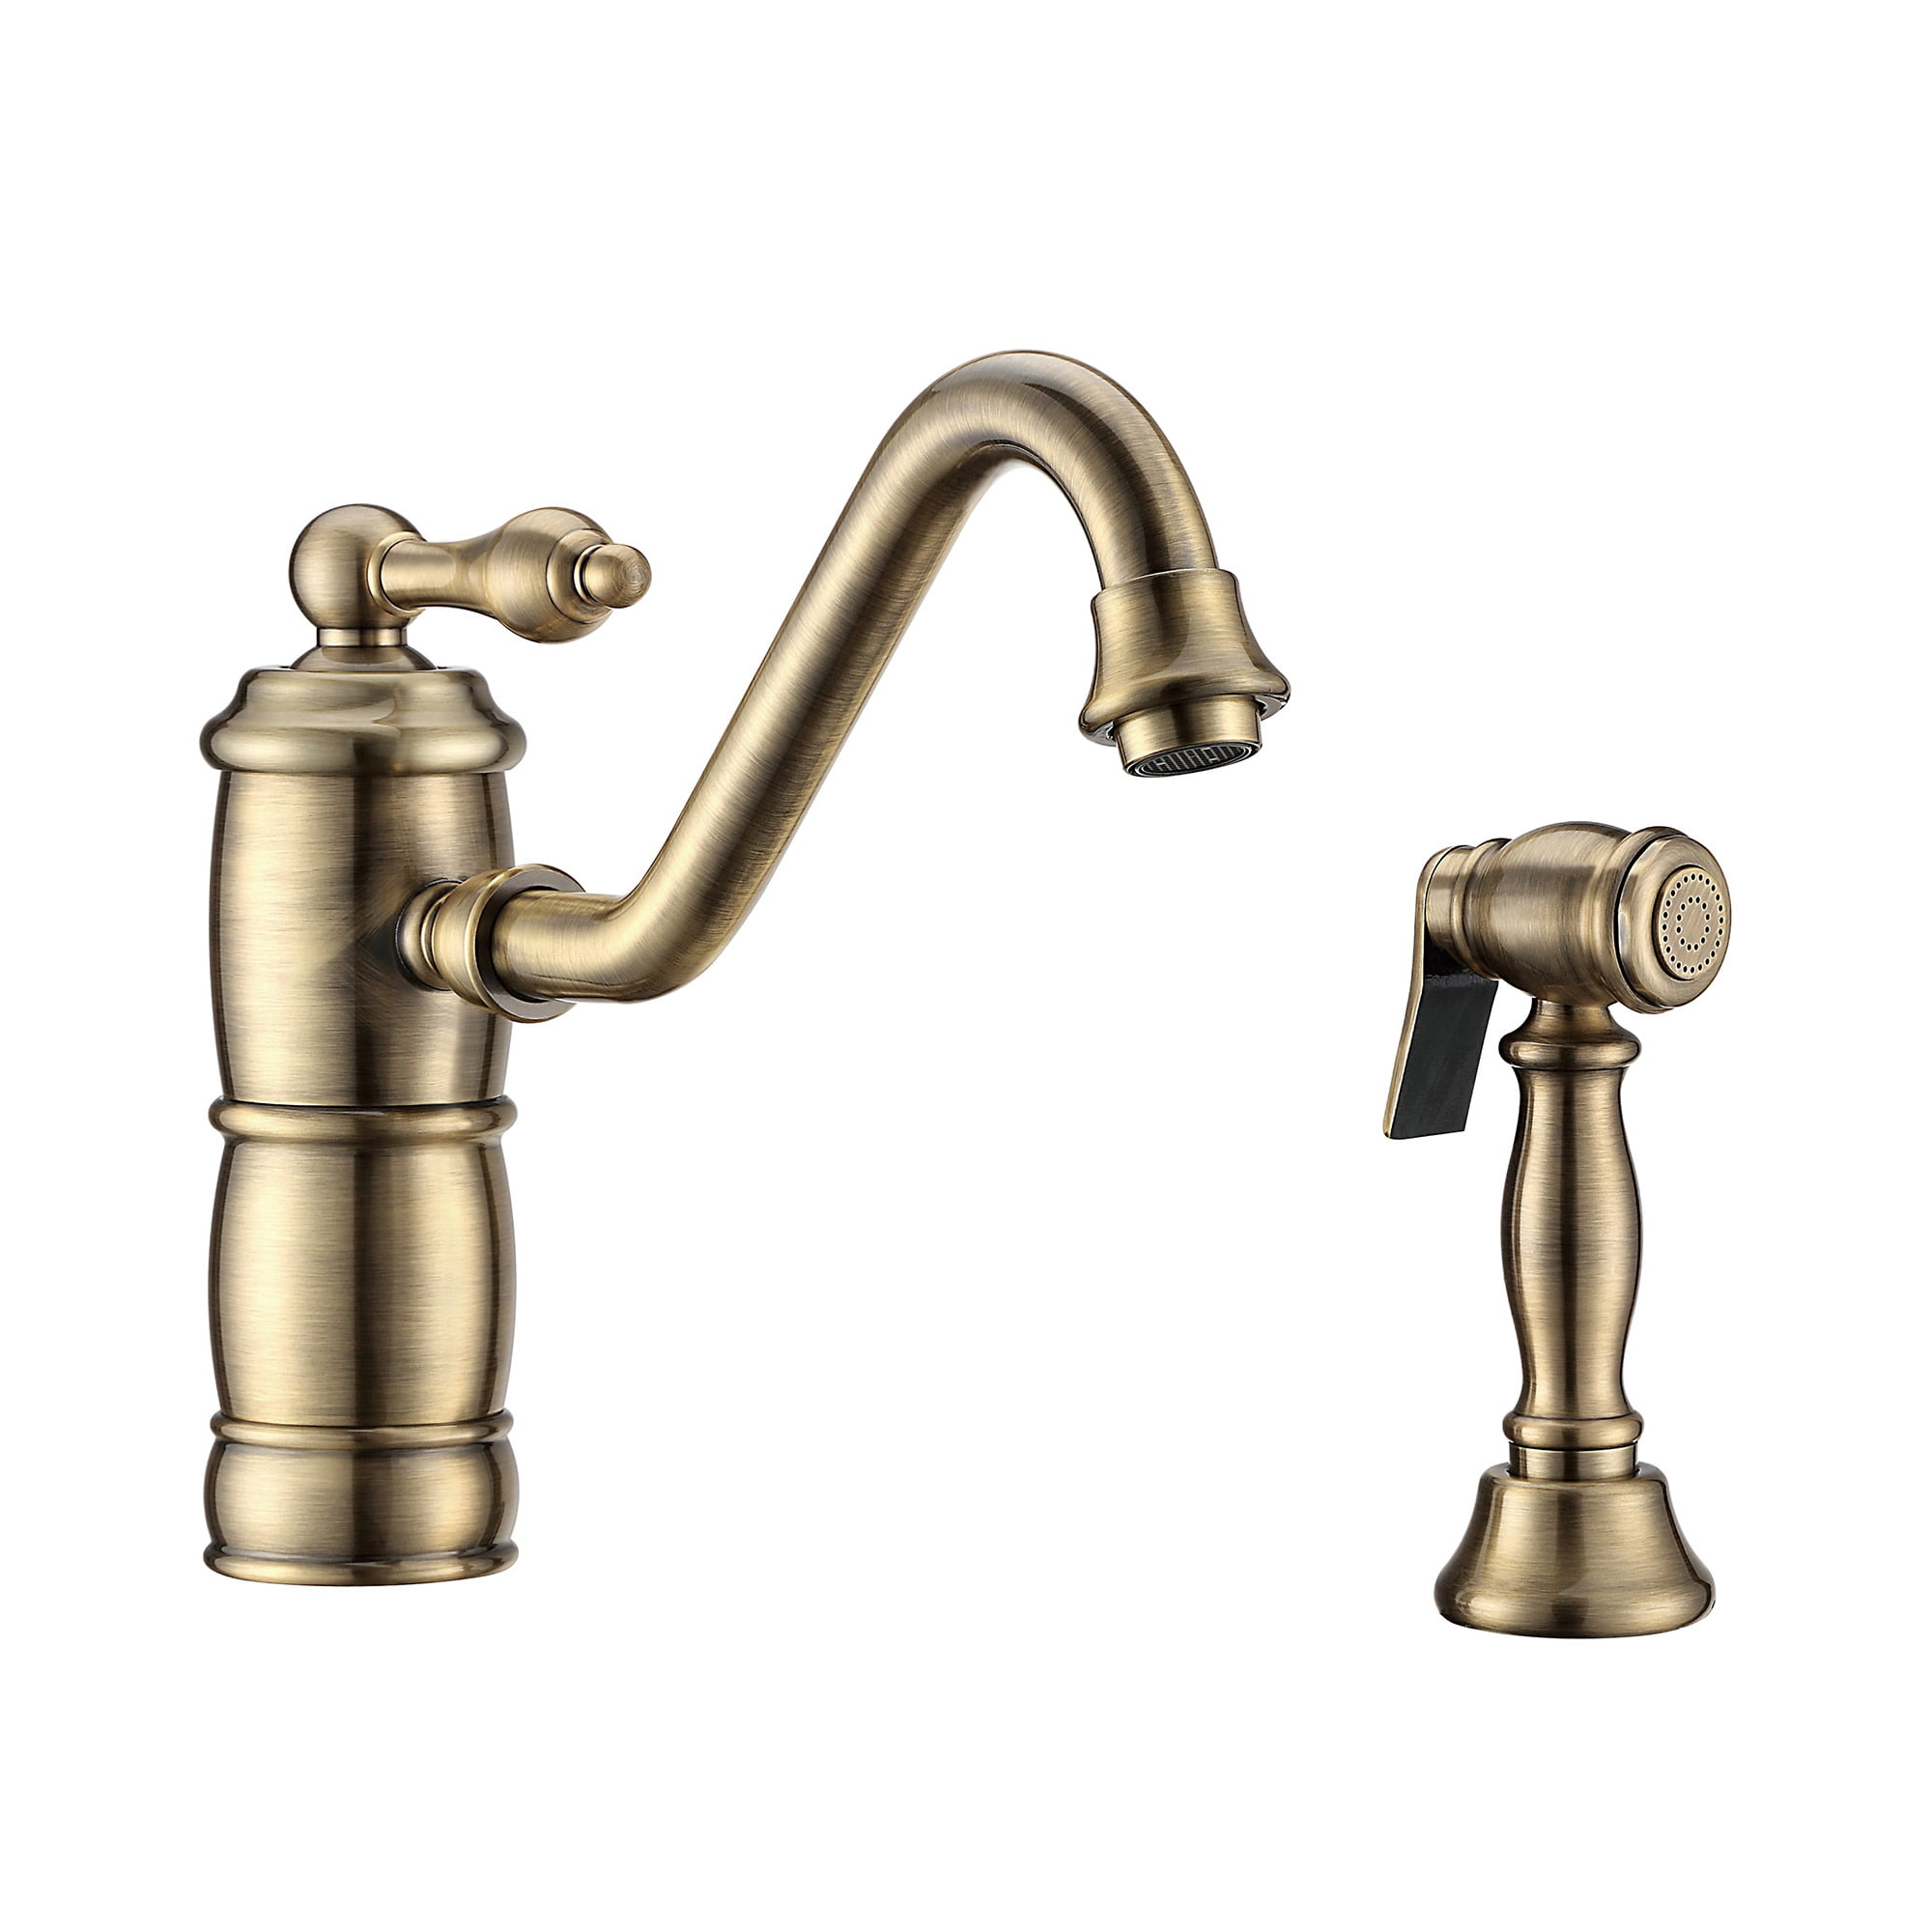 Whktsl3-2200-nt-ab Vintage Iii Plus Single-lever Faucet With A Traditional Swivel Spout - Antique Brass